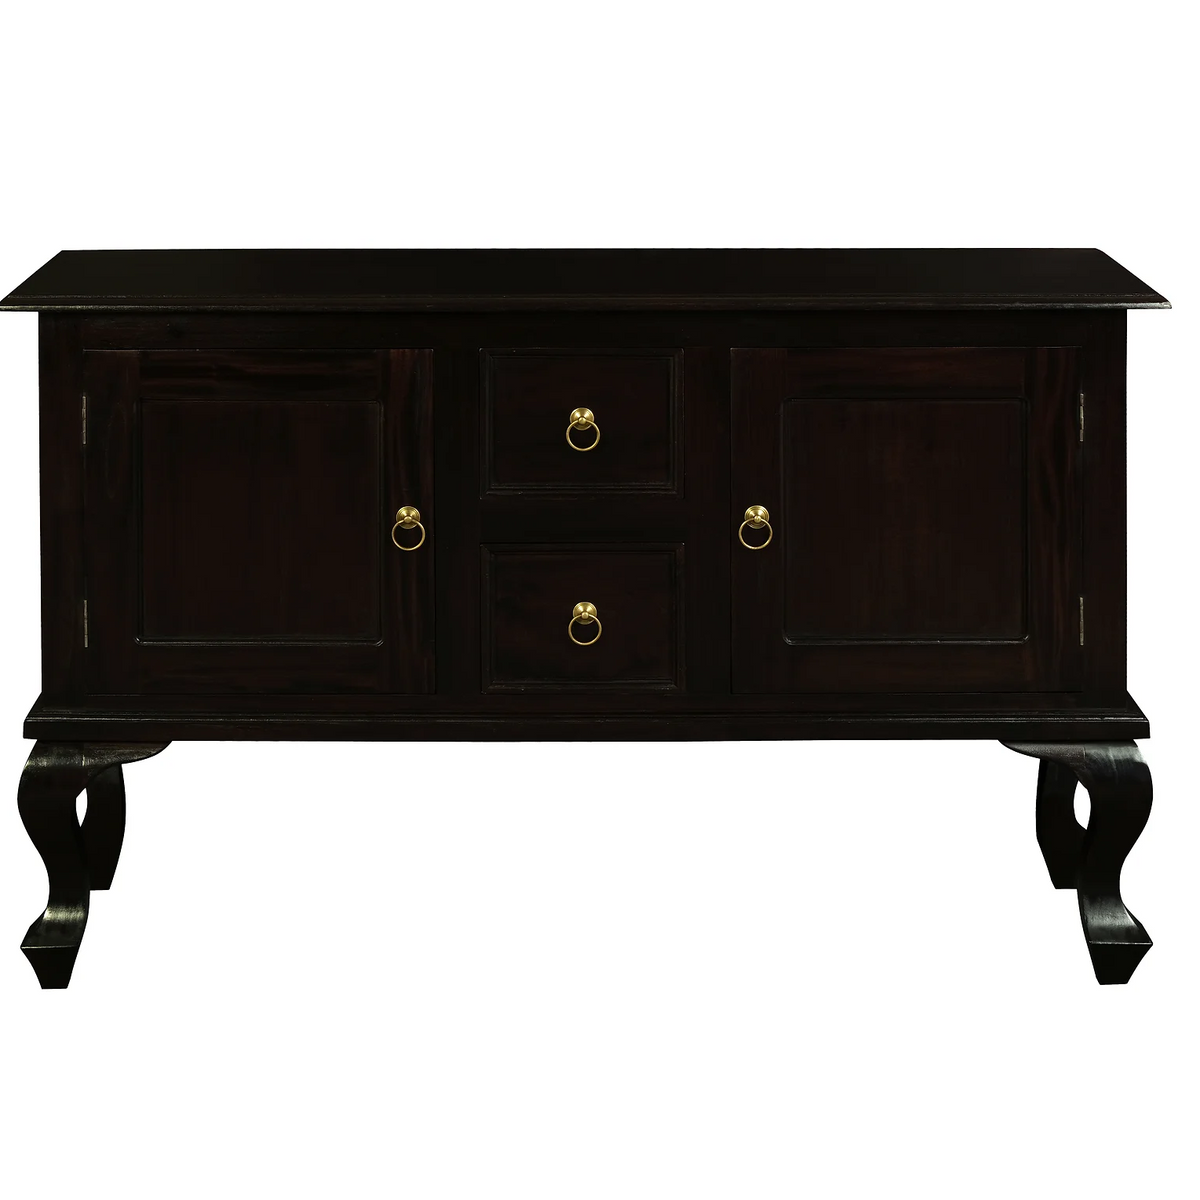 Queen Anne Timber 2 Door and 2 Drawer Console - Chocolate - Notbrand